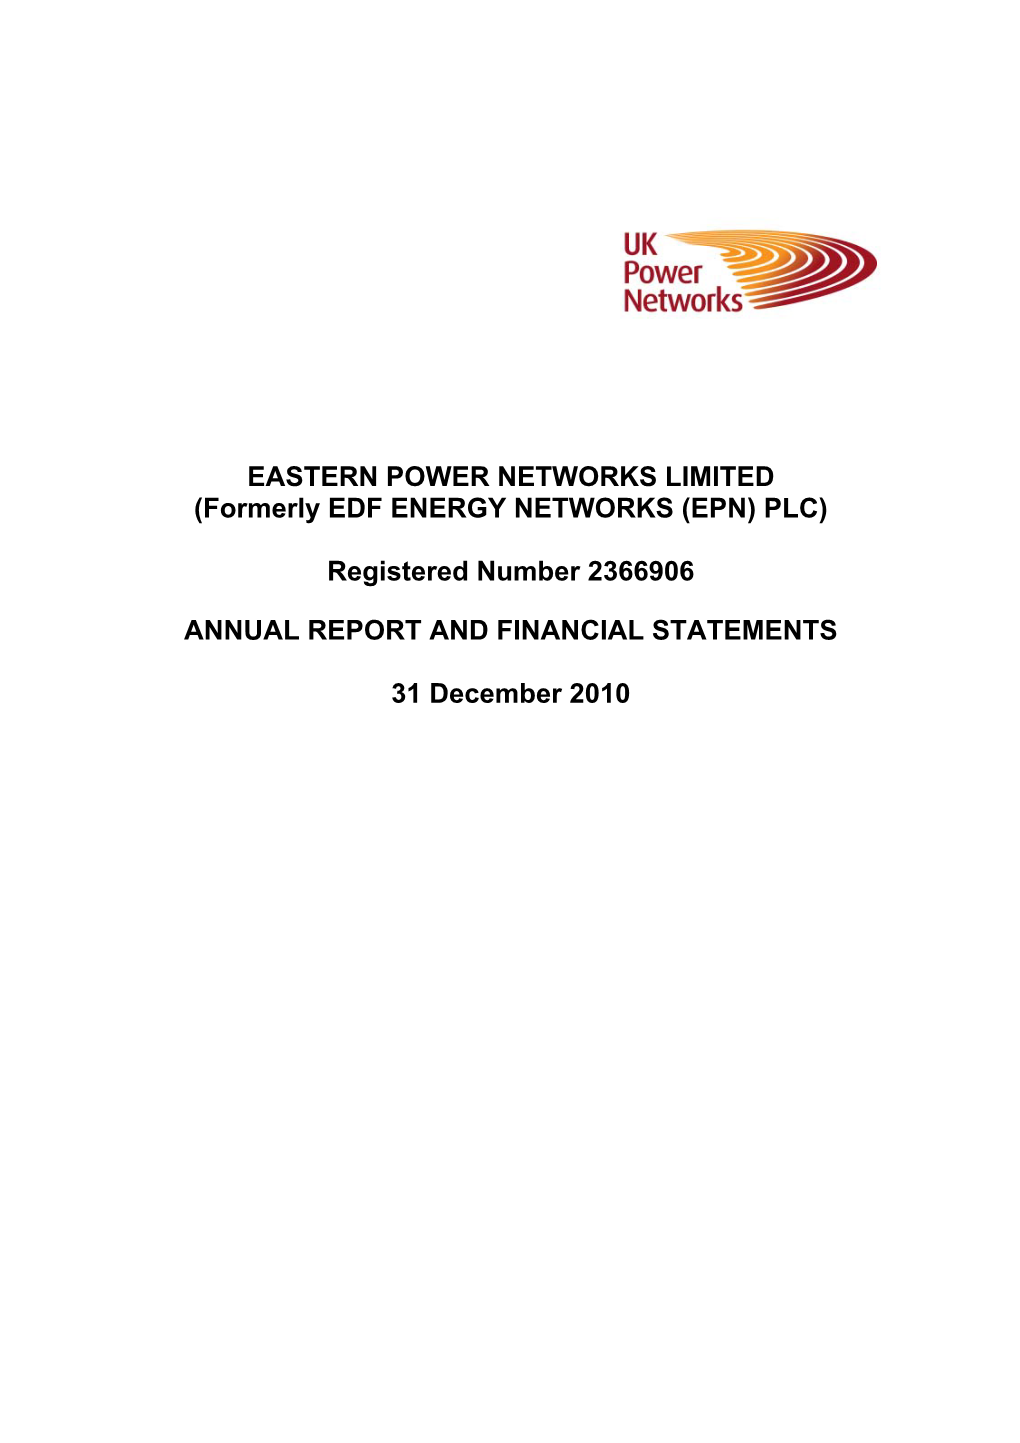 EASTERN POWER NETWORKS LIMITED (Formerly EDF ENERGY NETWORKS (EPN) PLC) Registered Number 2366906 ANNUAL REPORT and FINANCIAL ST